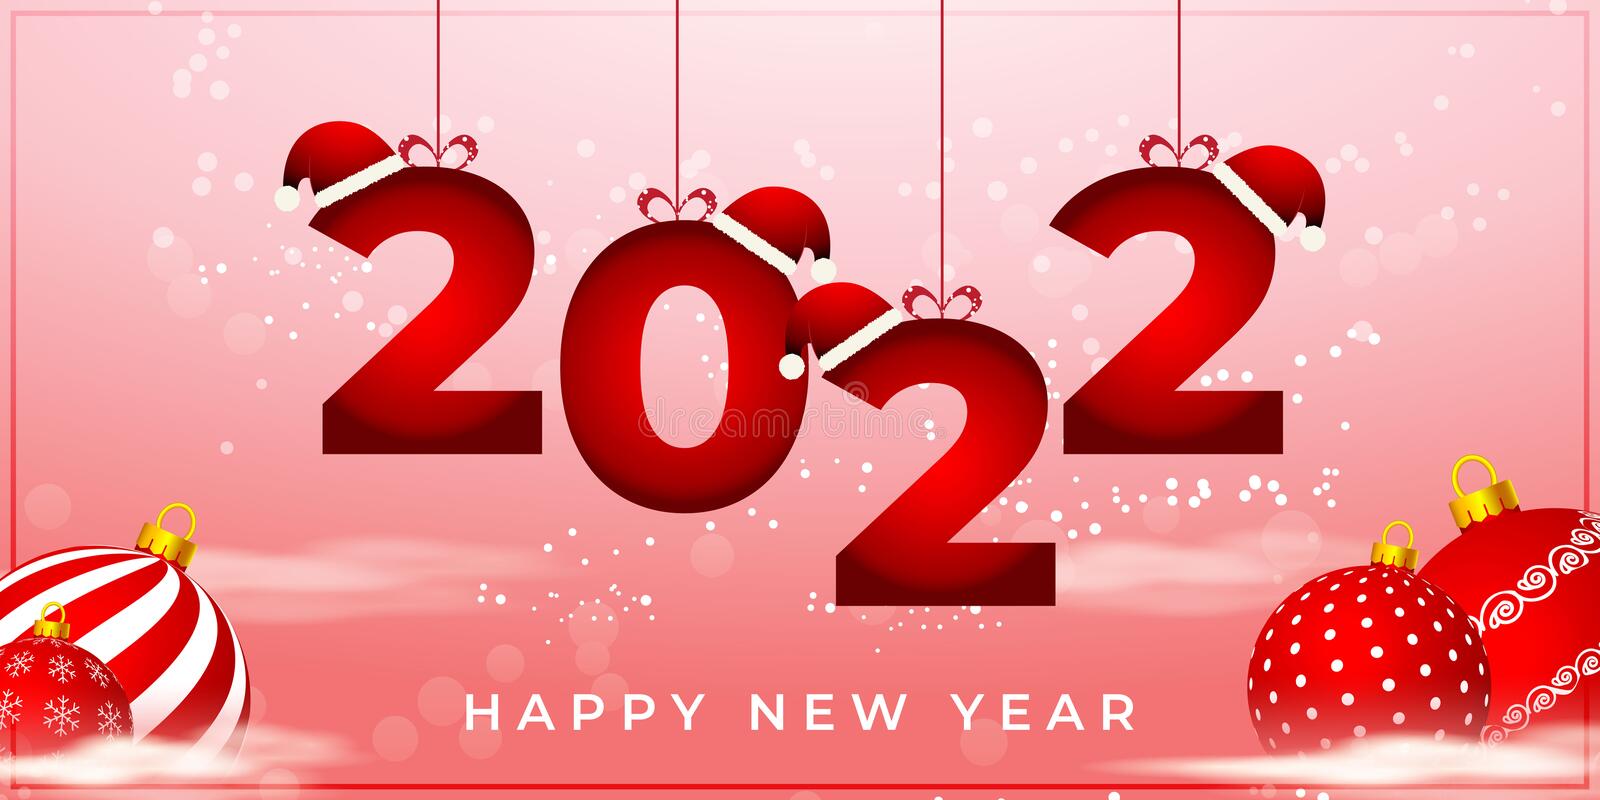 happy new year wishes cards 2022